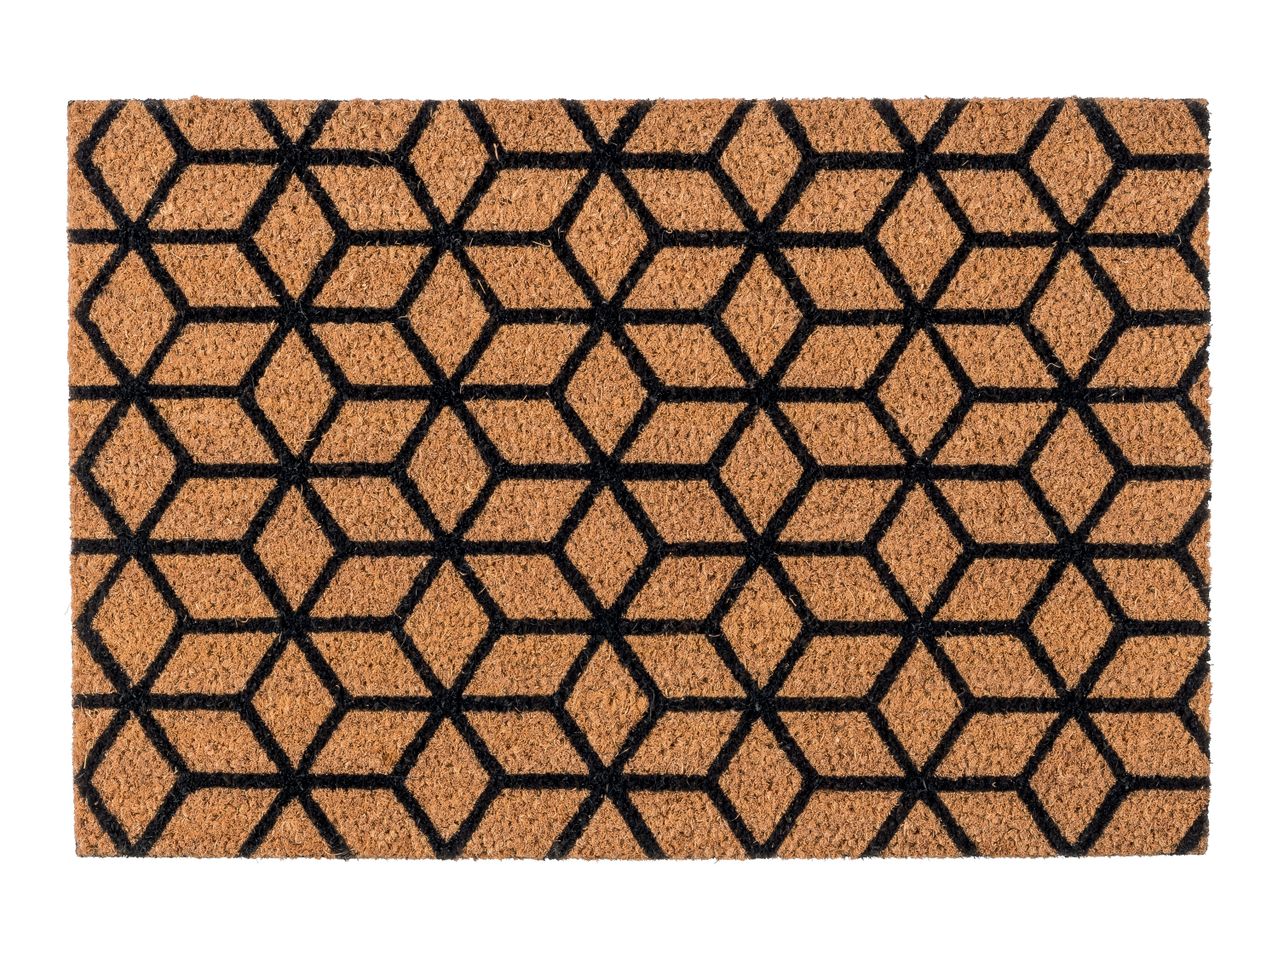 Go to full screen view: Livarno Home Coir Doormat Assorted Designs - Image 9